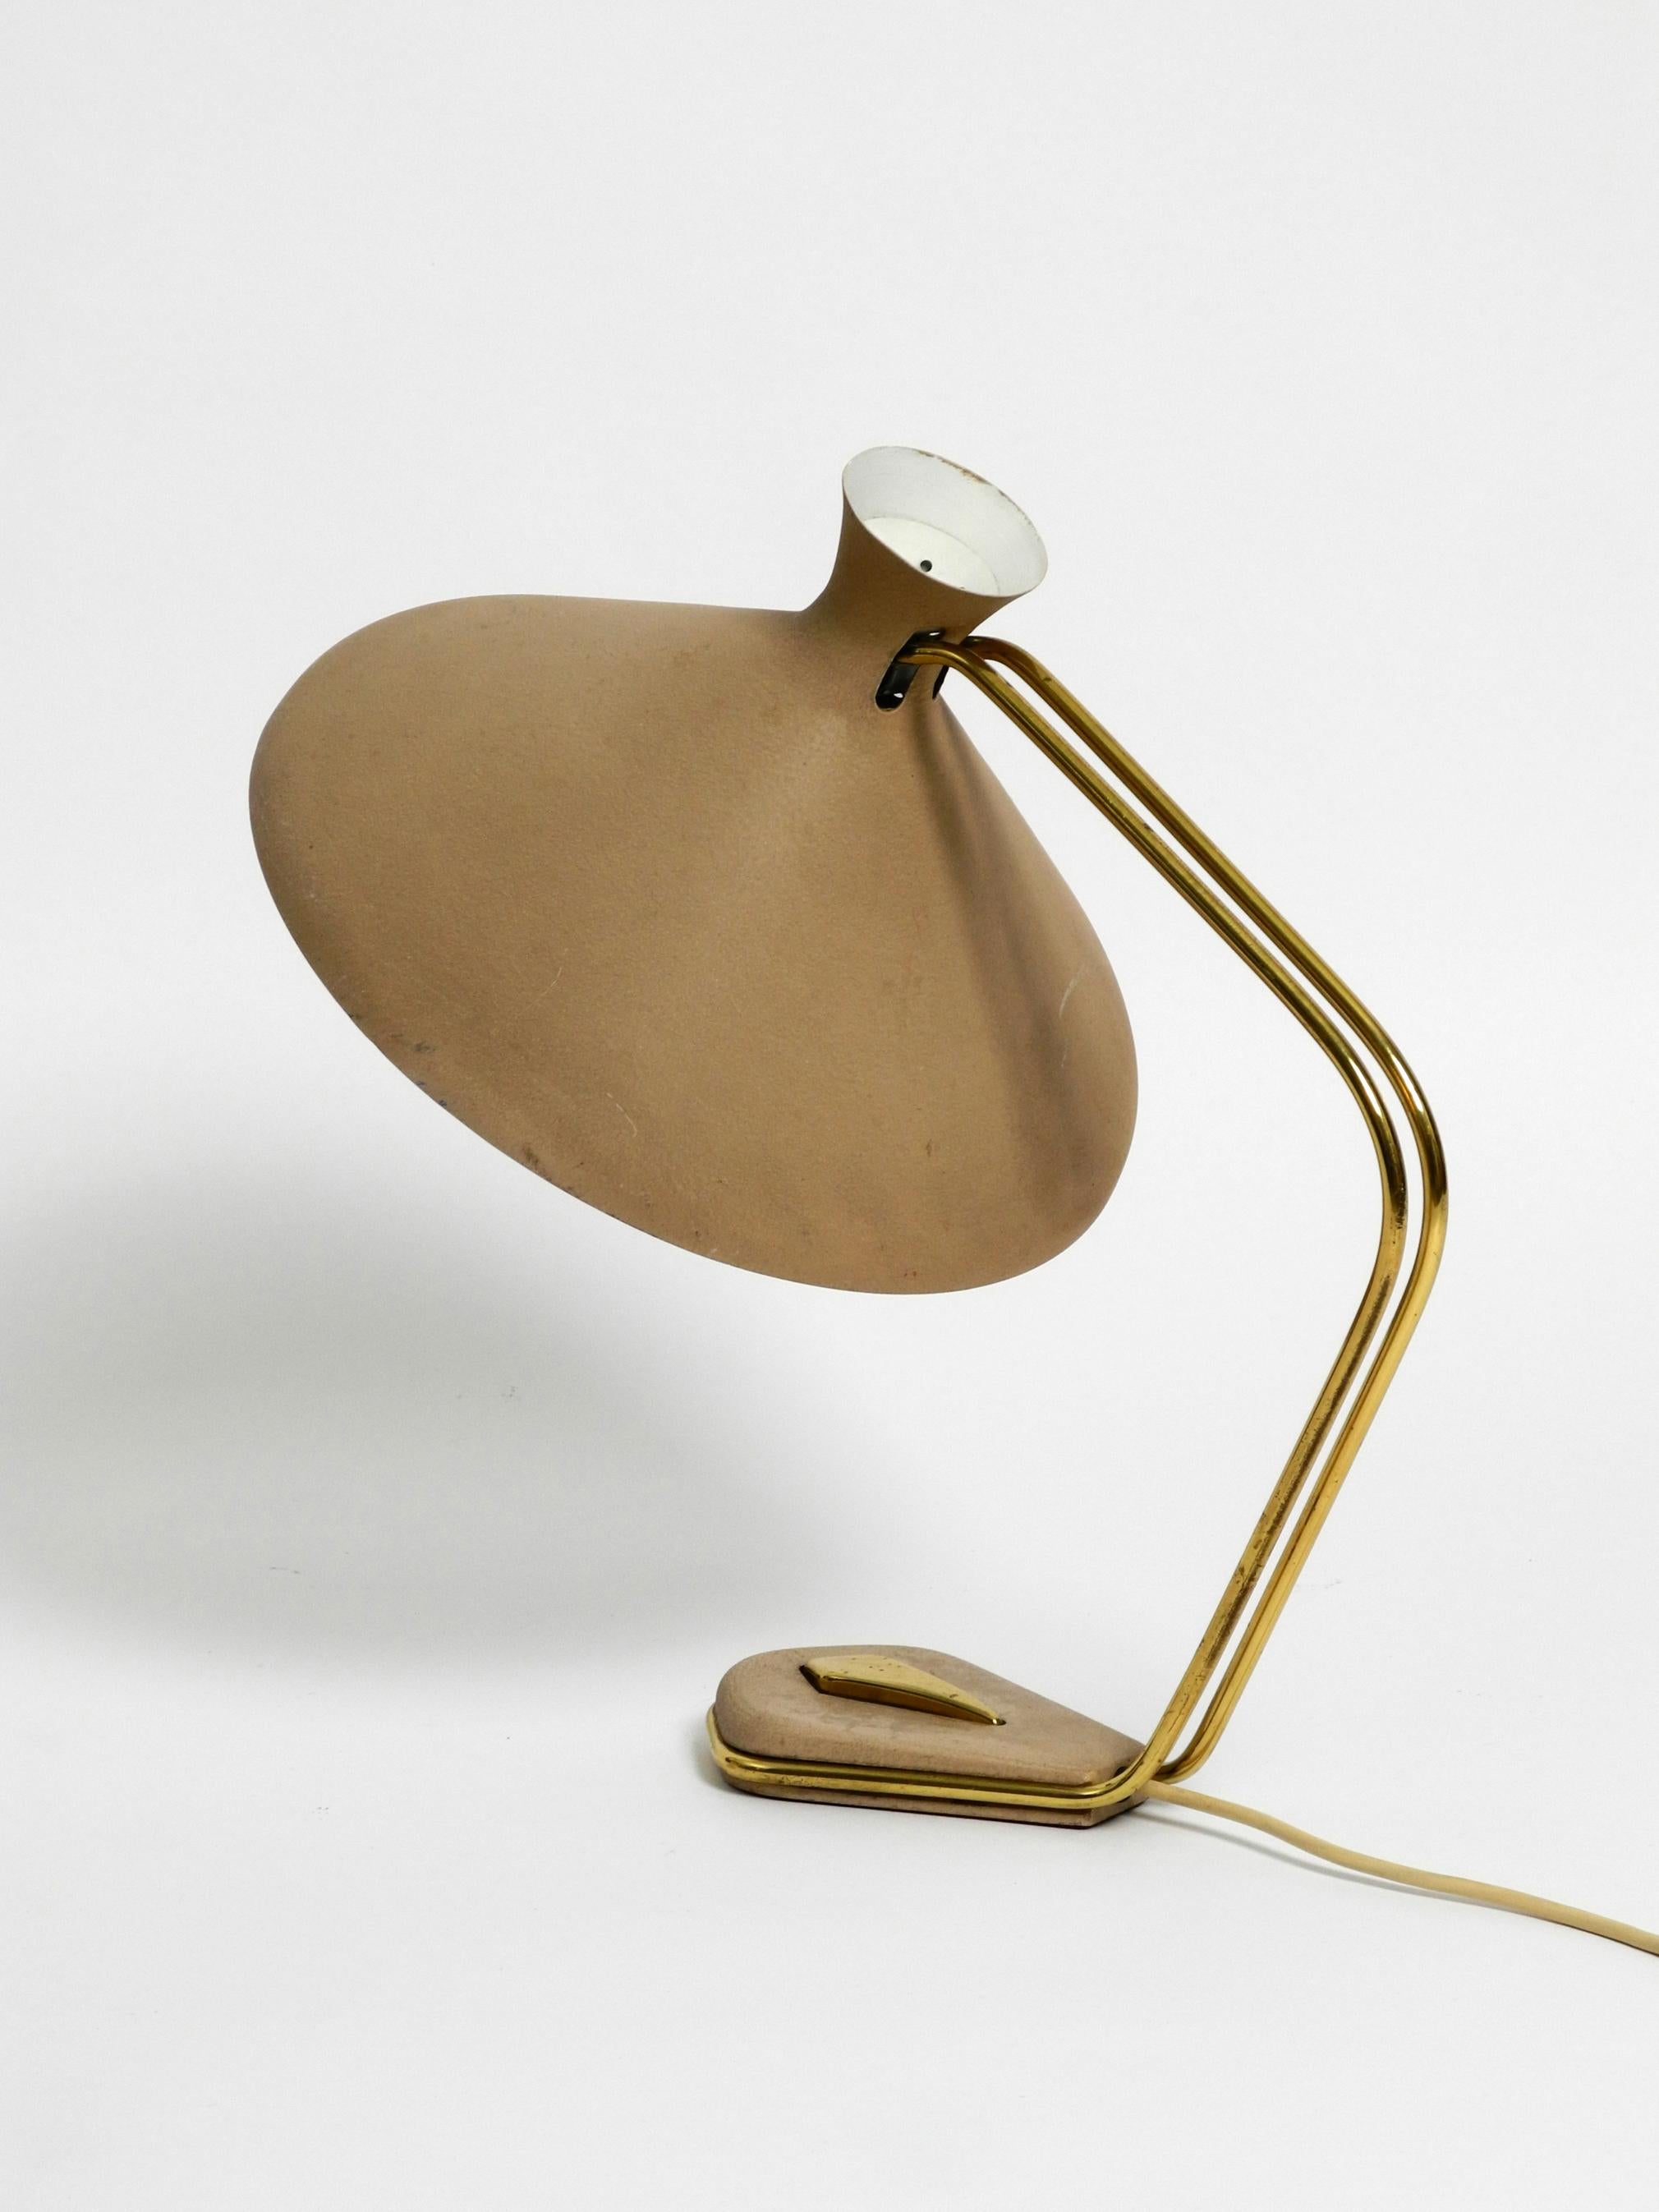 Extraordinary Large German Mid-Century Modern Brass and Metal Table Lamp For Sale 2